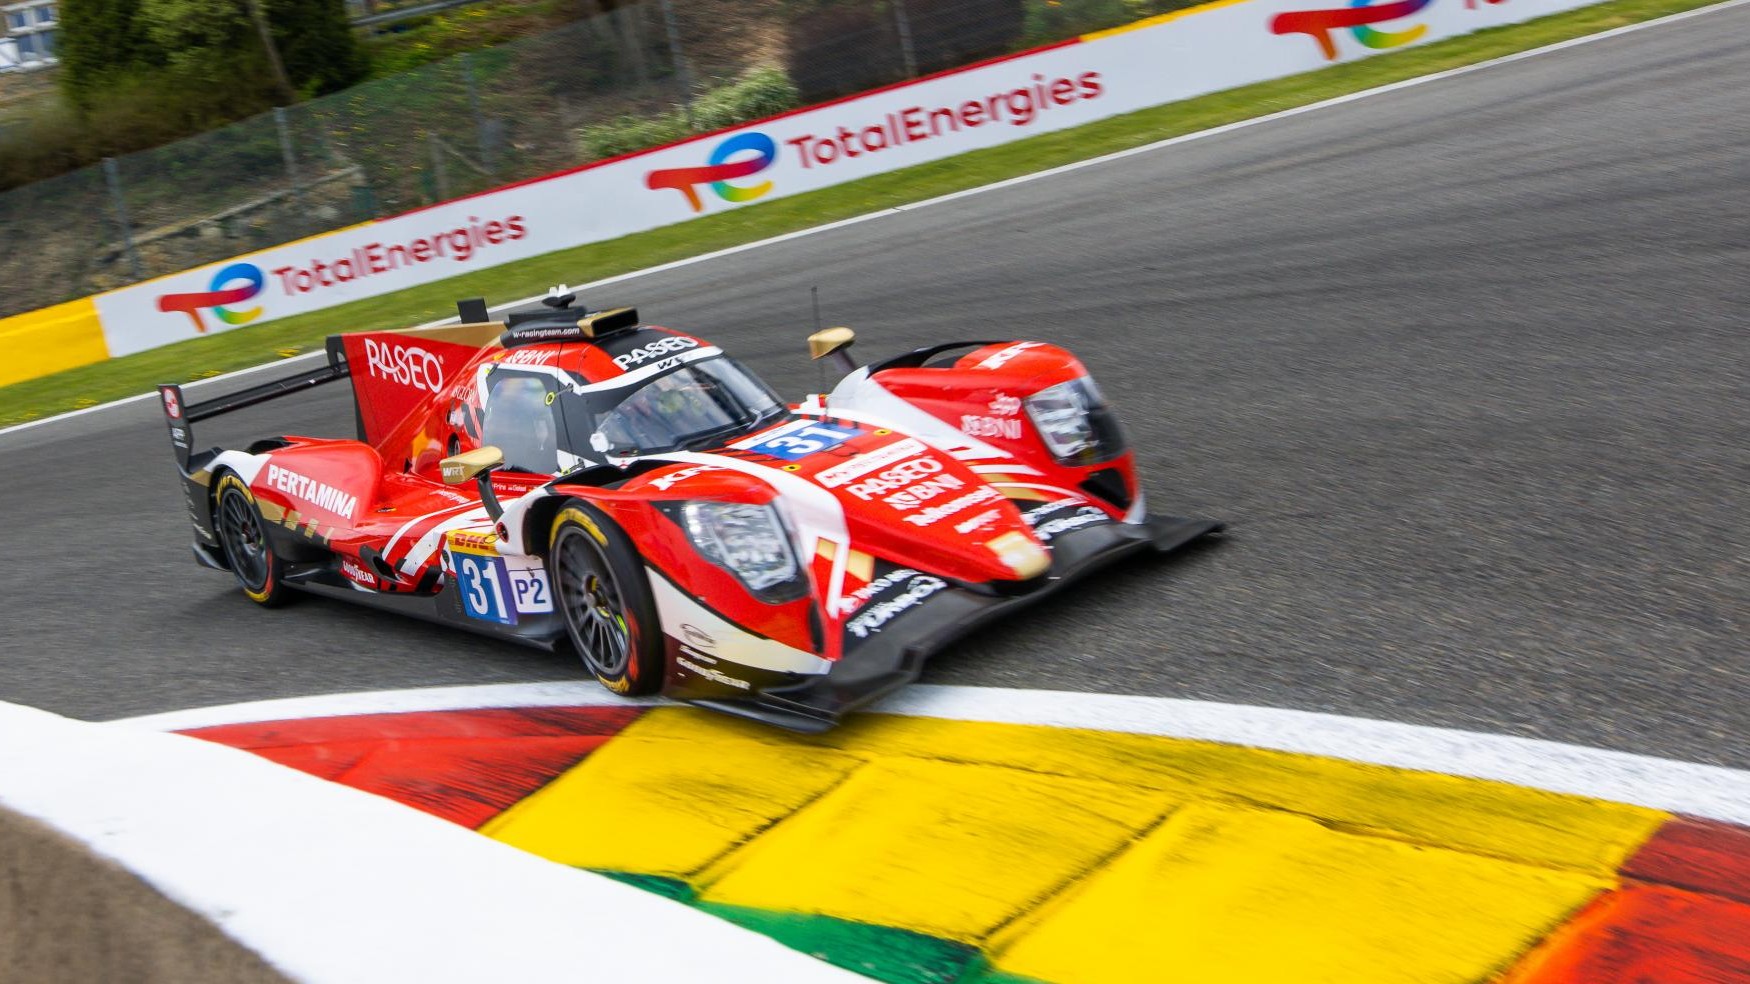 WRT fastest as LMP2 class dominates in the first practice session of WEC 6 Hours of Spa